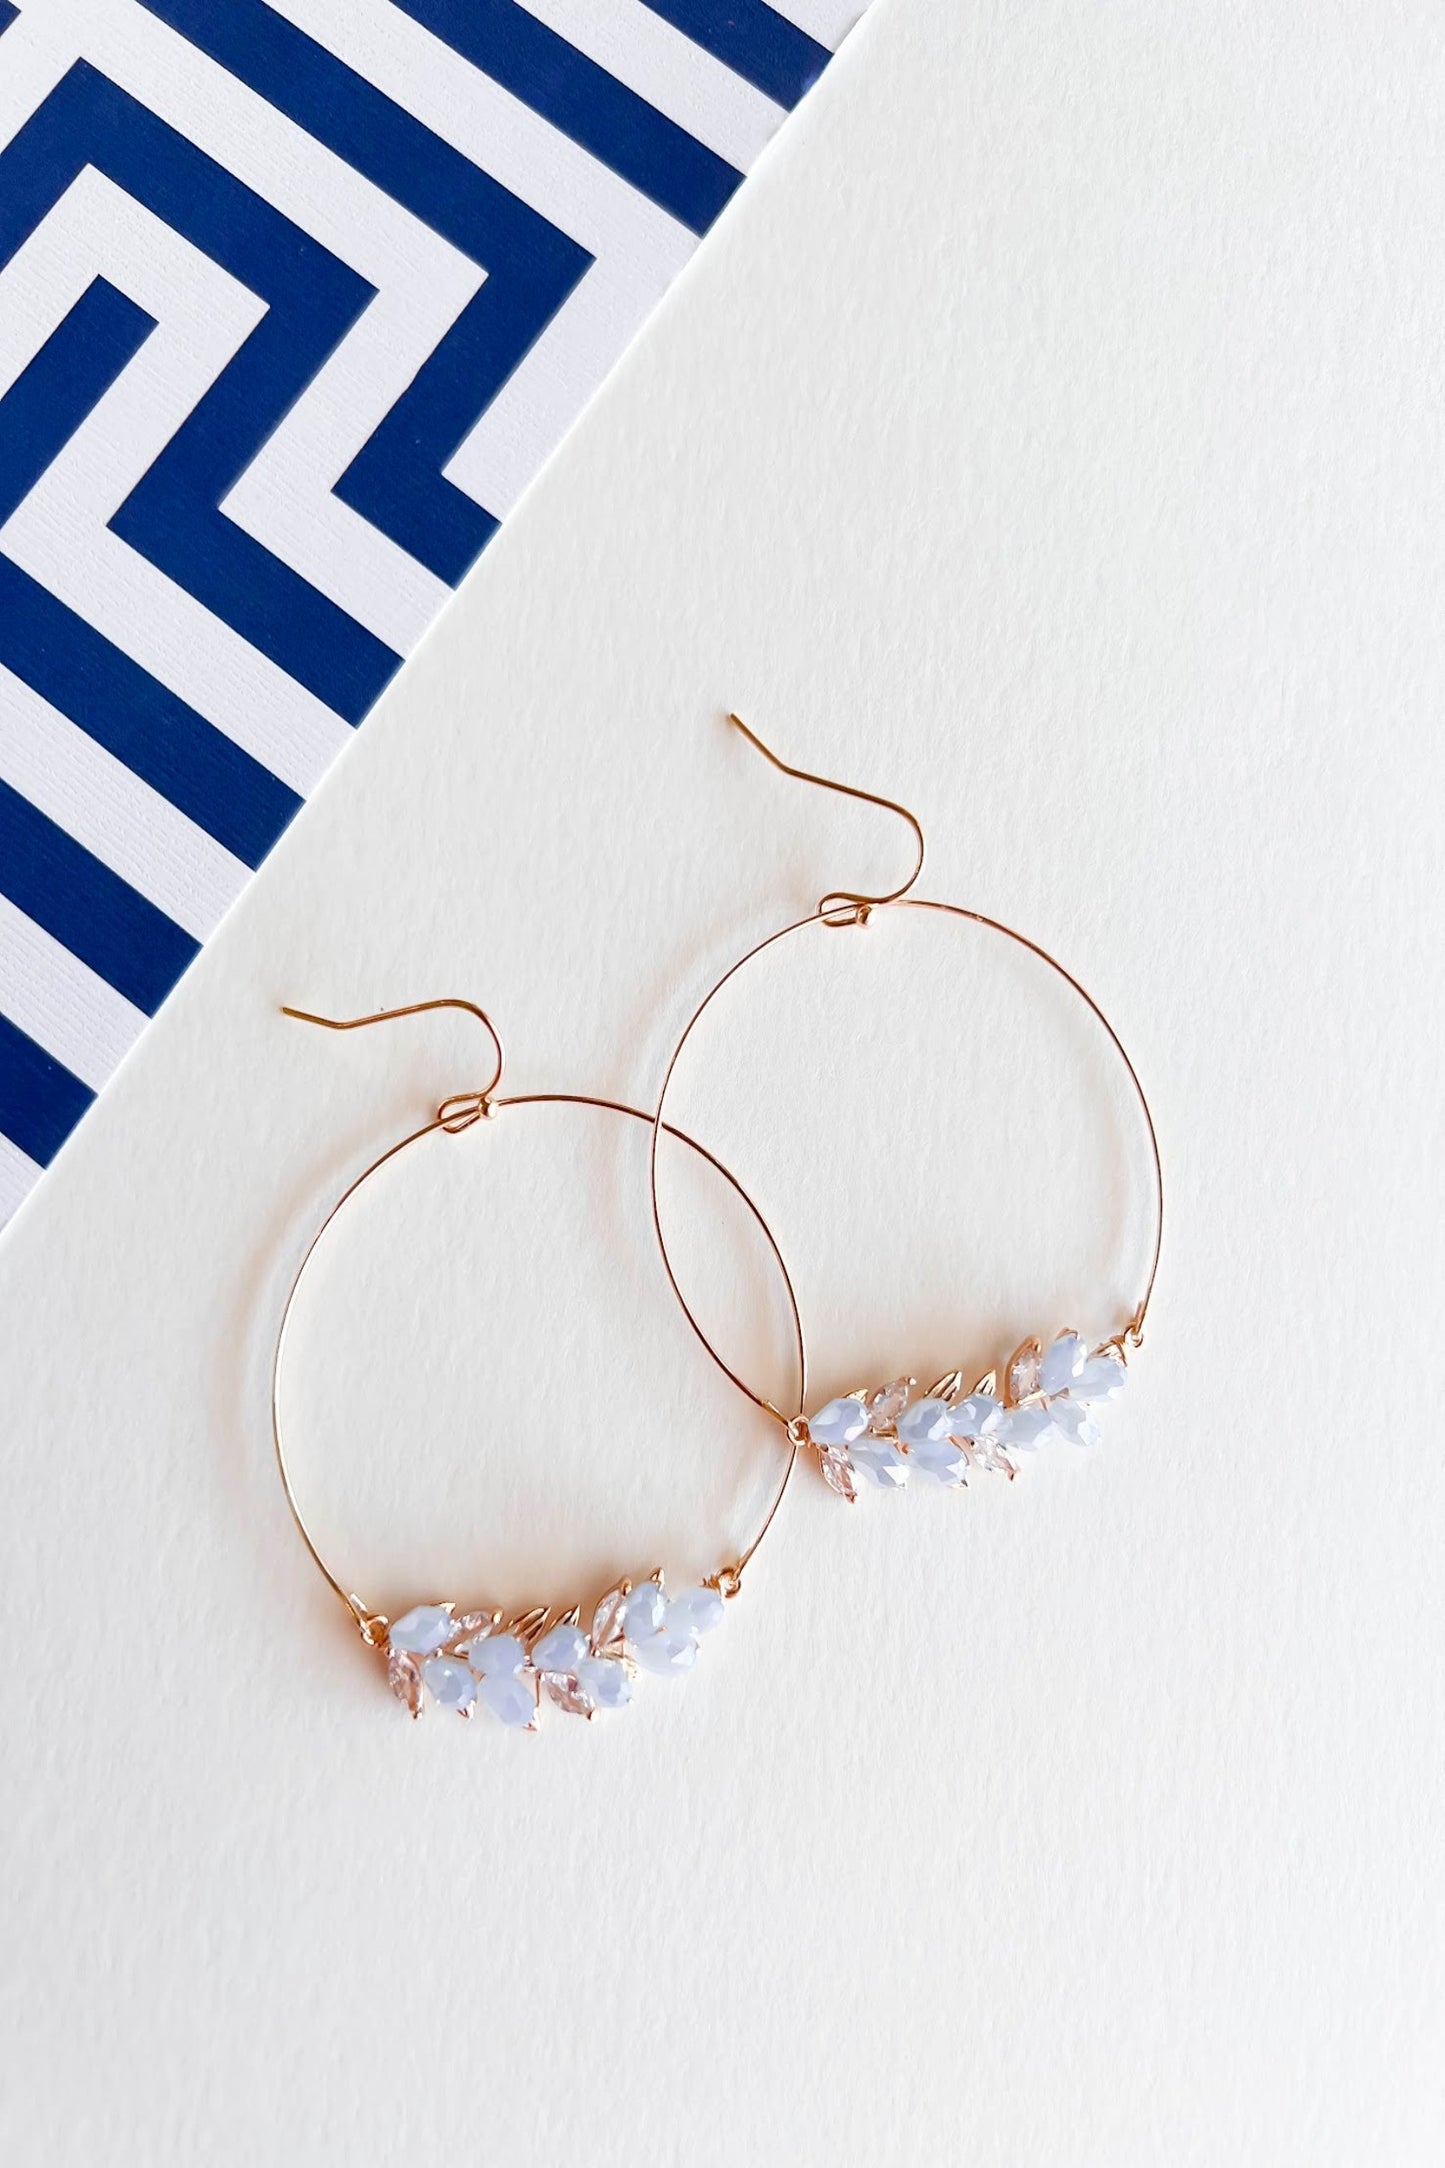 Zoe Crystal Hoop Earrings | Thin Gold Hoops with Frosted Blue Crystal Details | Everyday and Special Occasion Jewelry | Wedding Season Accessories